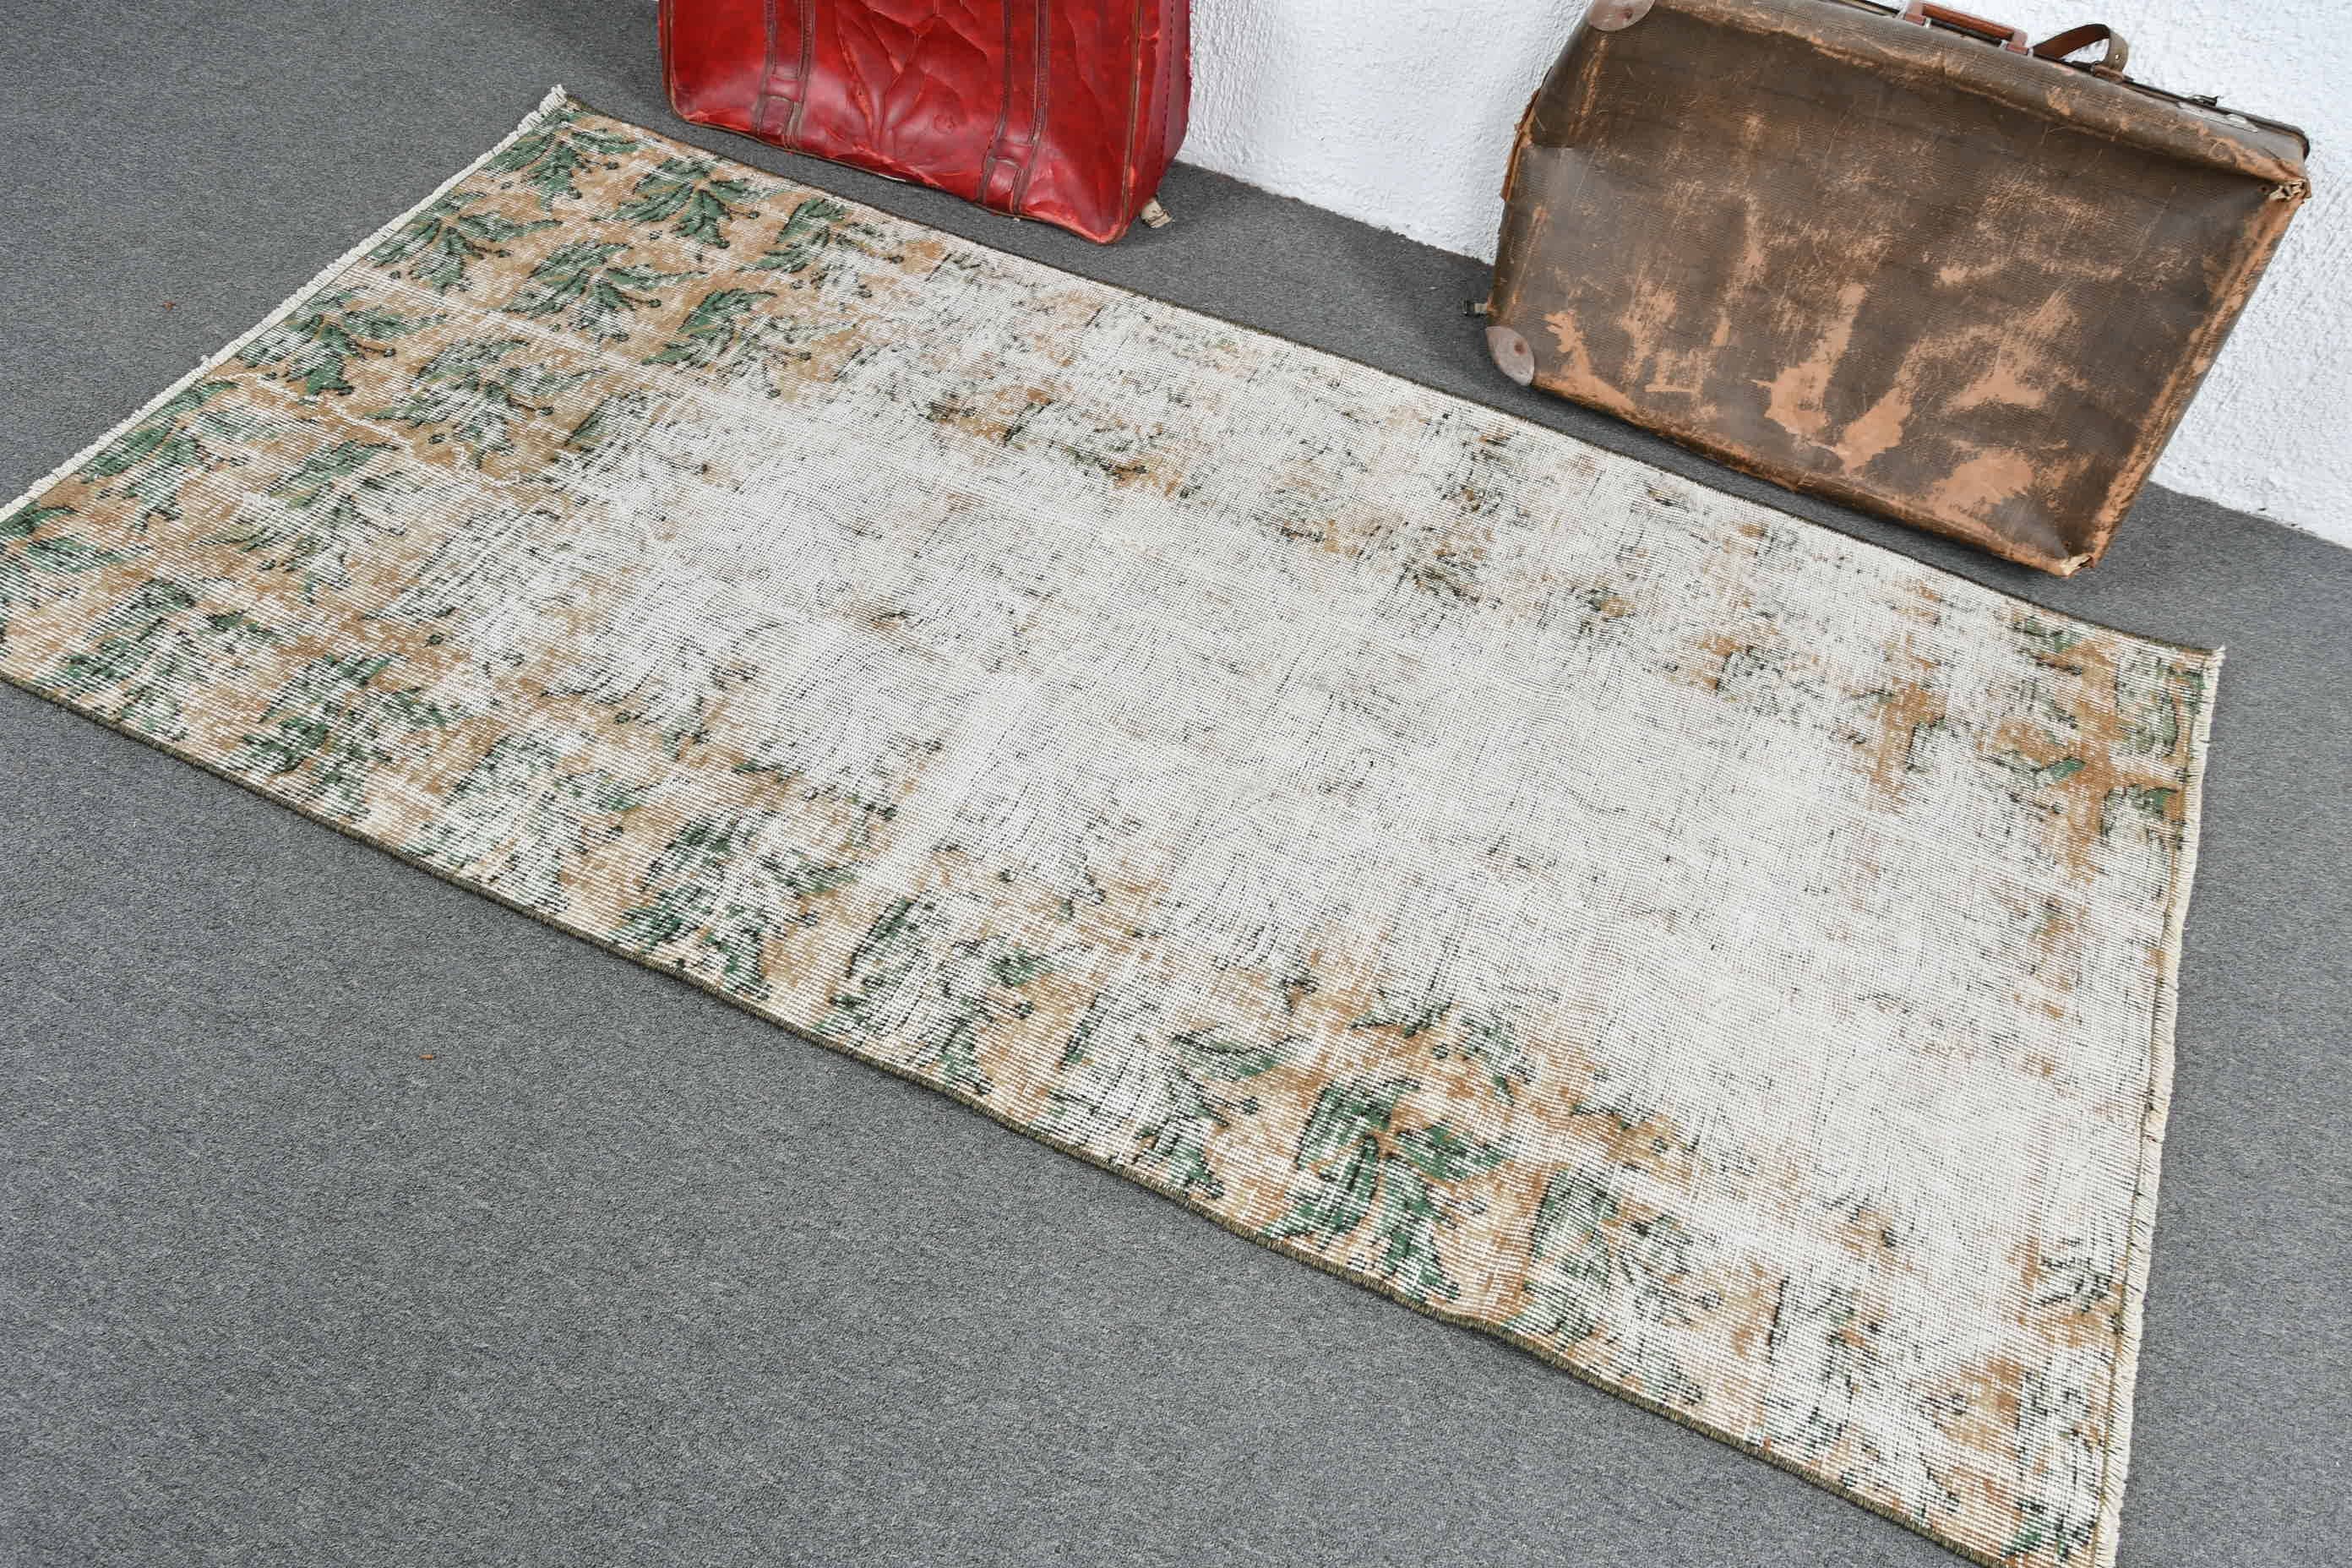 Entry Rugs, Turkish Rugs, Rugs for Entry, Home Decor Rug, Cool Rug, White Floor Rug, Vintage Rug, Kitchen Rugs, 3.5x6.7 ft Accent Rugs